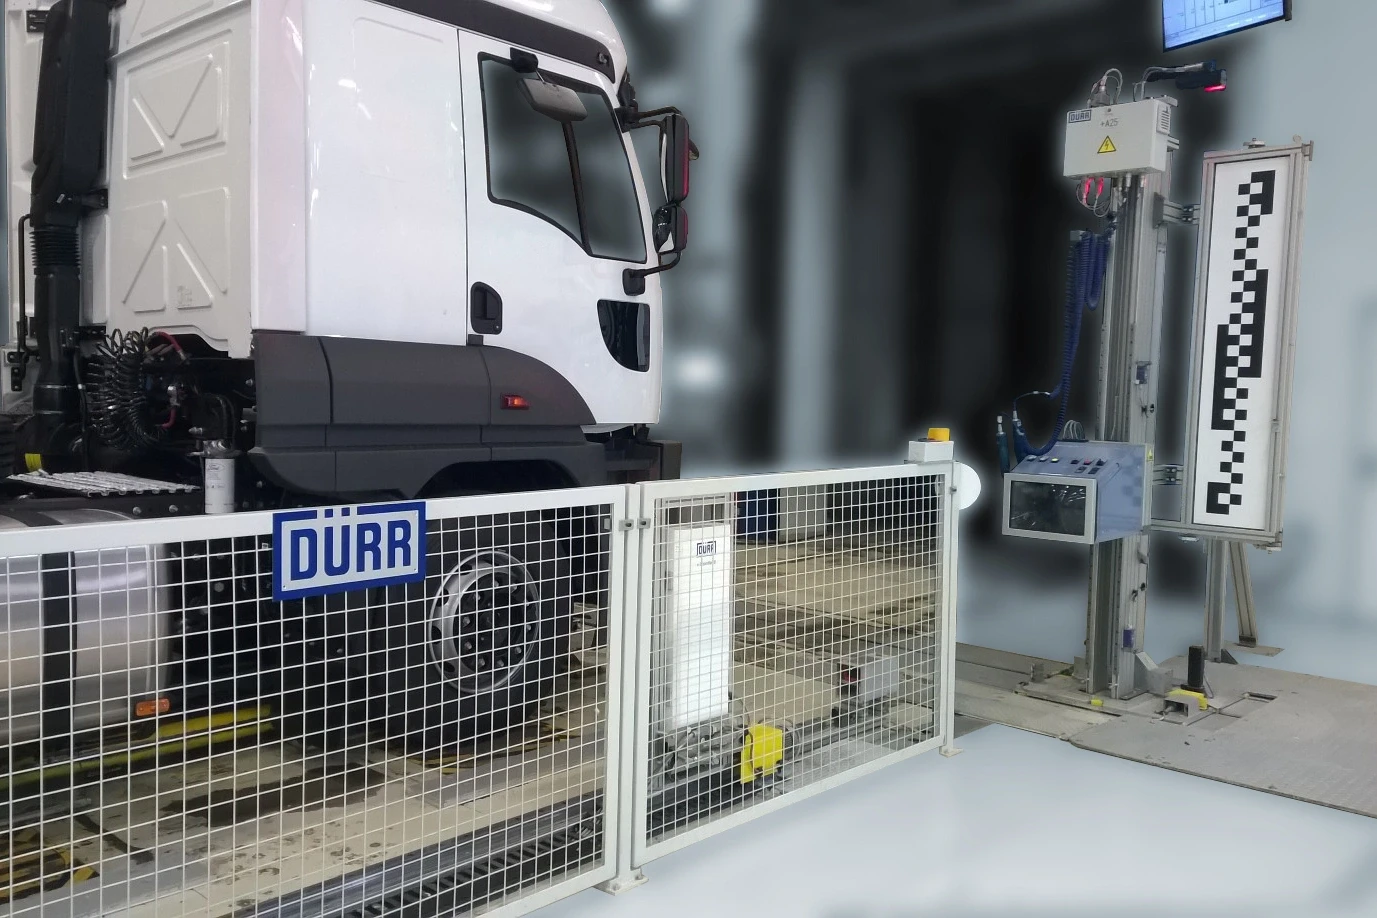 Dürr's headlamp aiming system for commercial vehicles